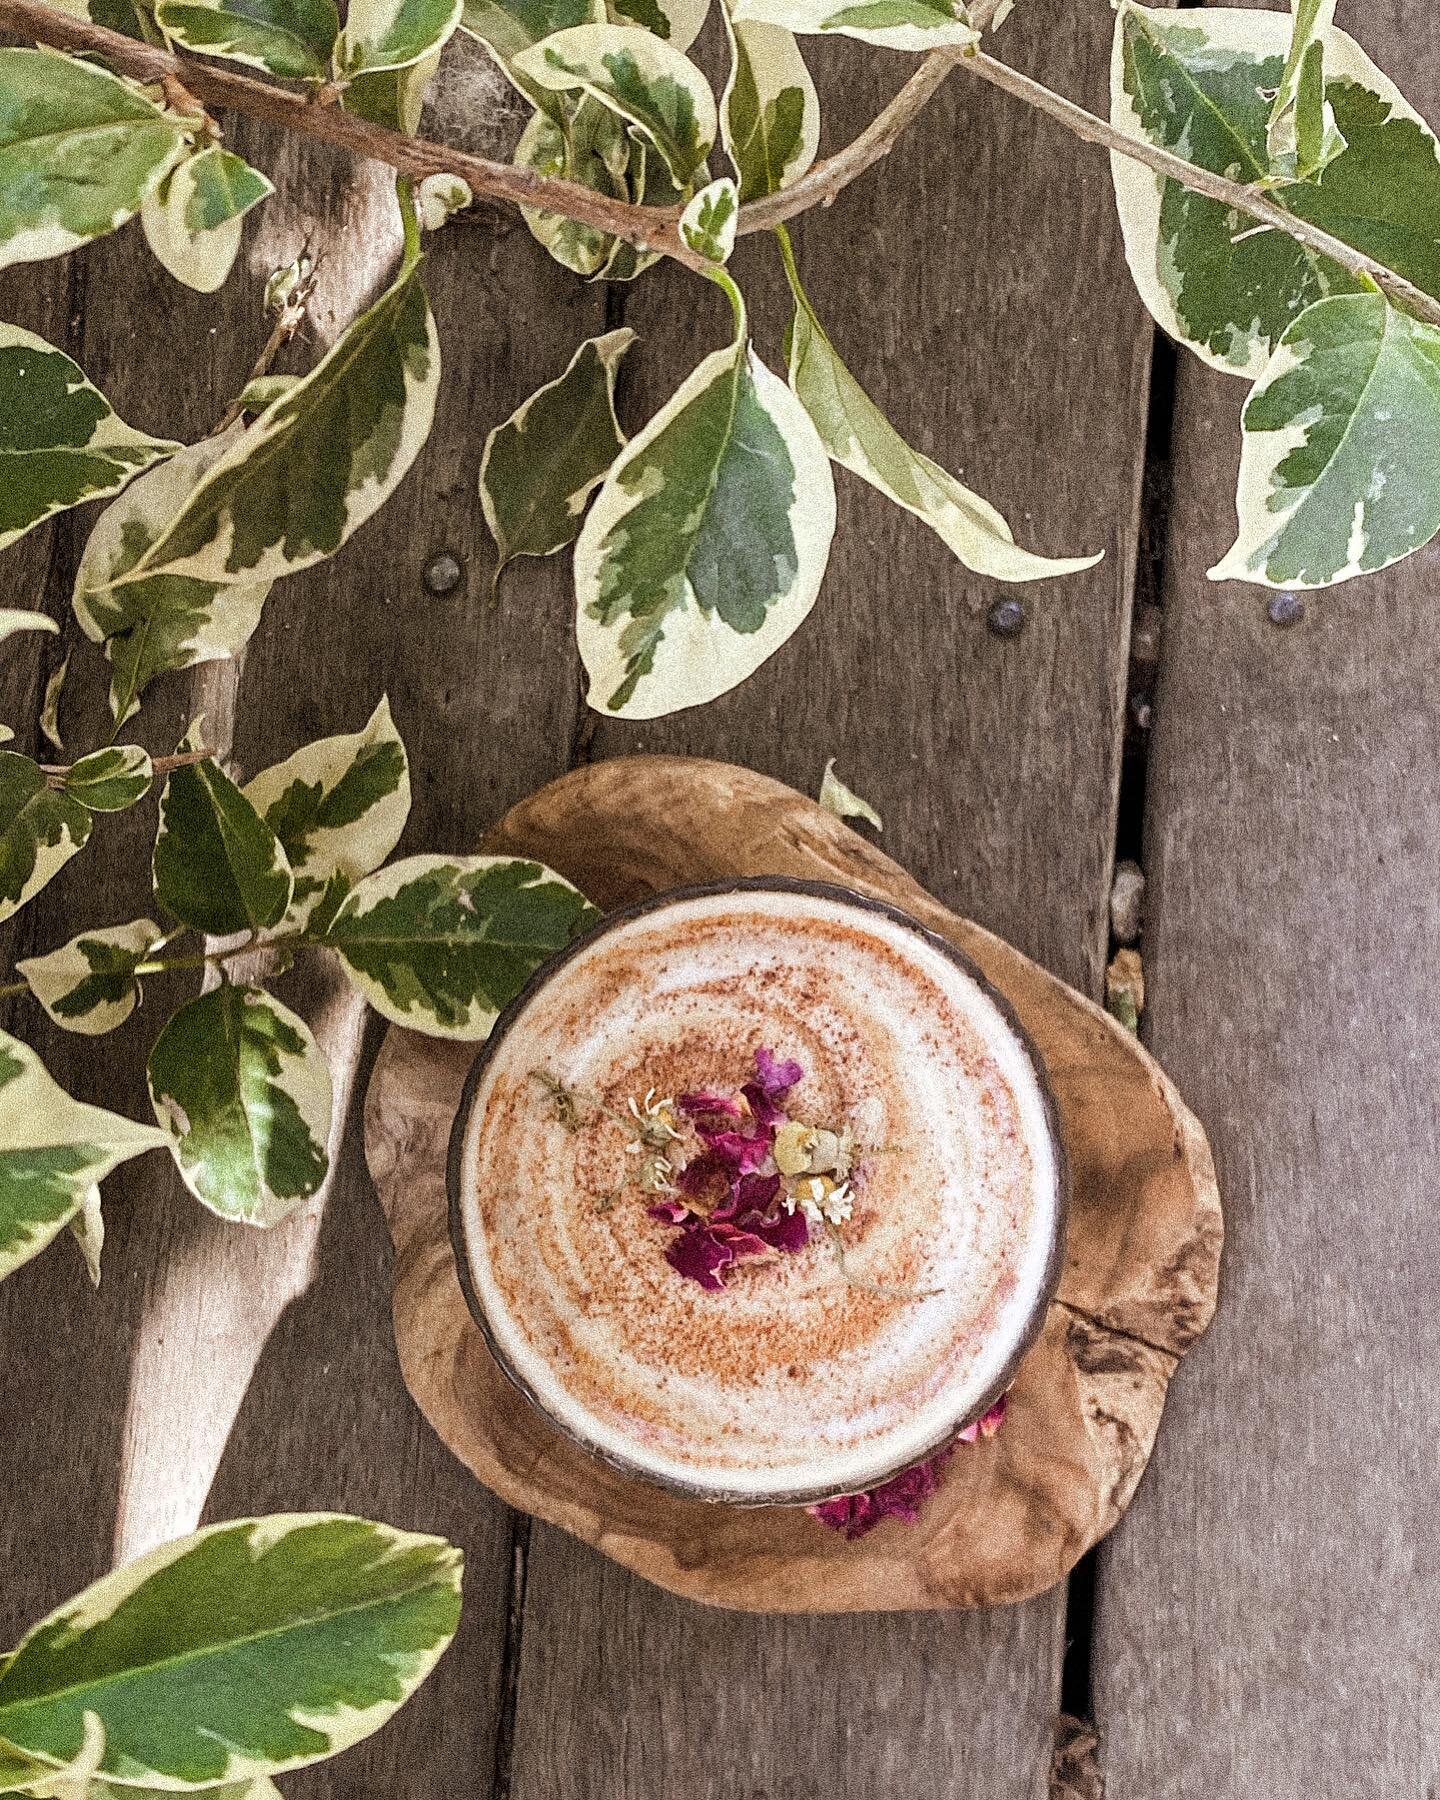 We have put a lot of thought into our drinks menu, opting for medicinal ingredients that promote health and vitality.
-
The LSD🍄 is a caffeine free, warm elixir that helps to balance hormones &amp; boost libido.
Containing @byronbayteacompany herbal